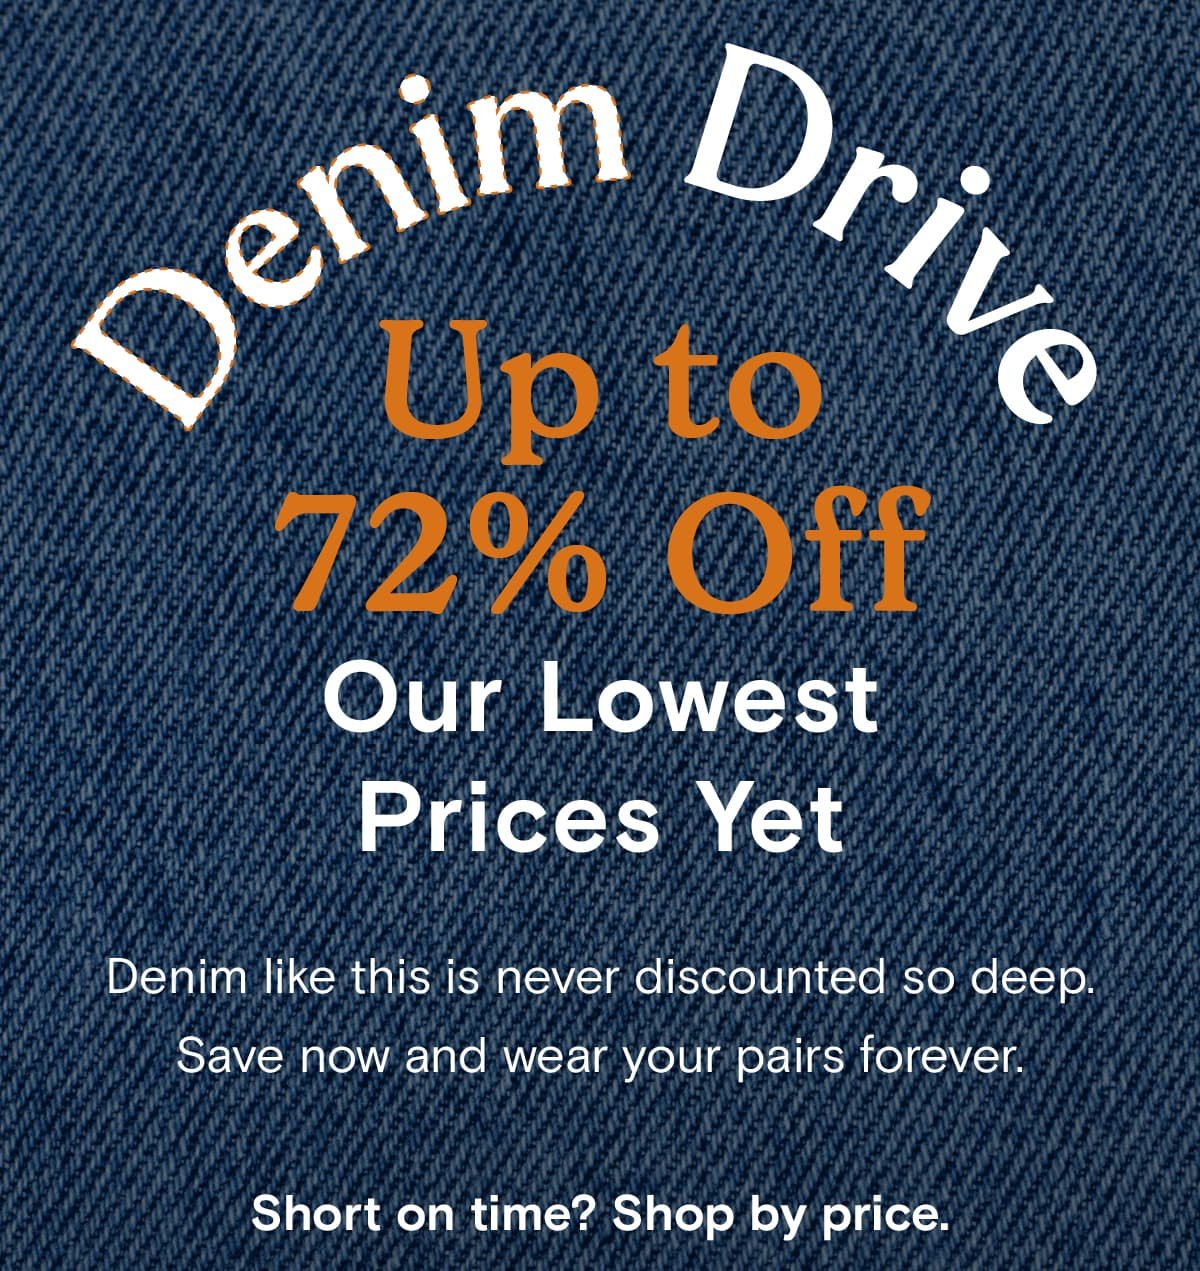 Shop Denim Drive prices of up to 72% off